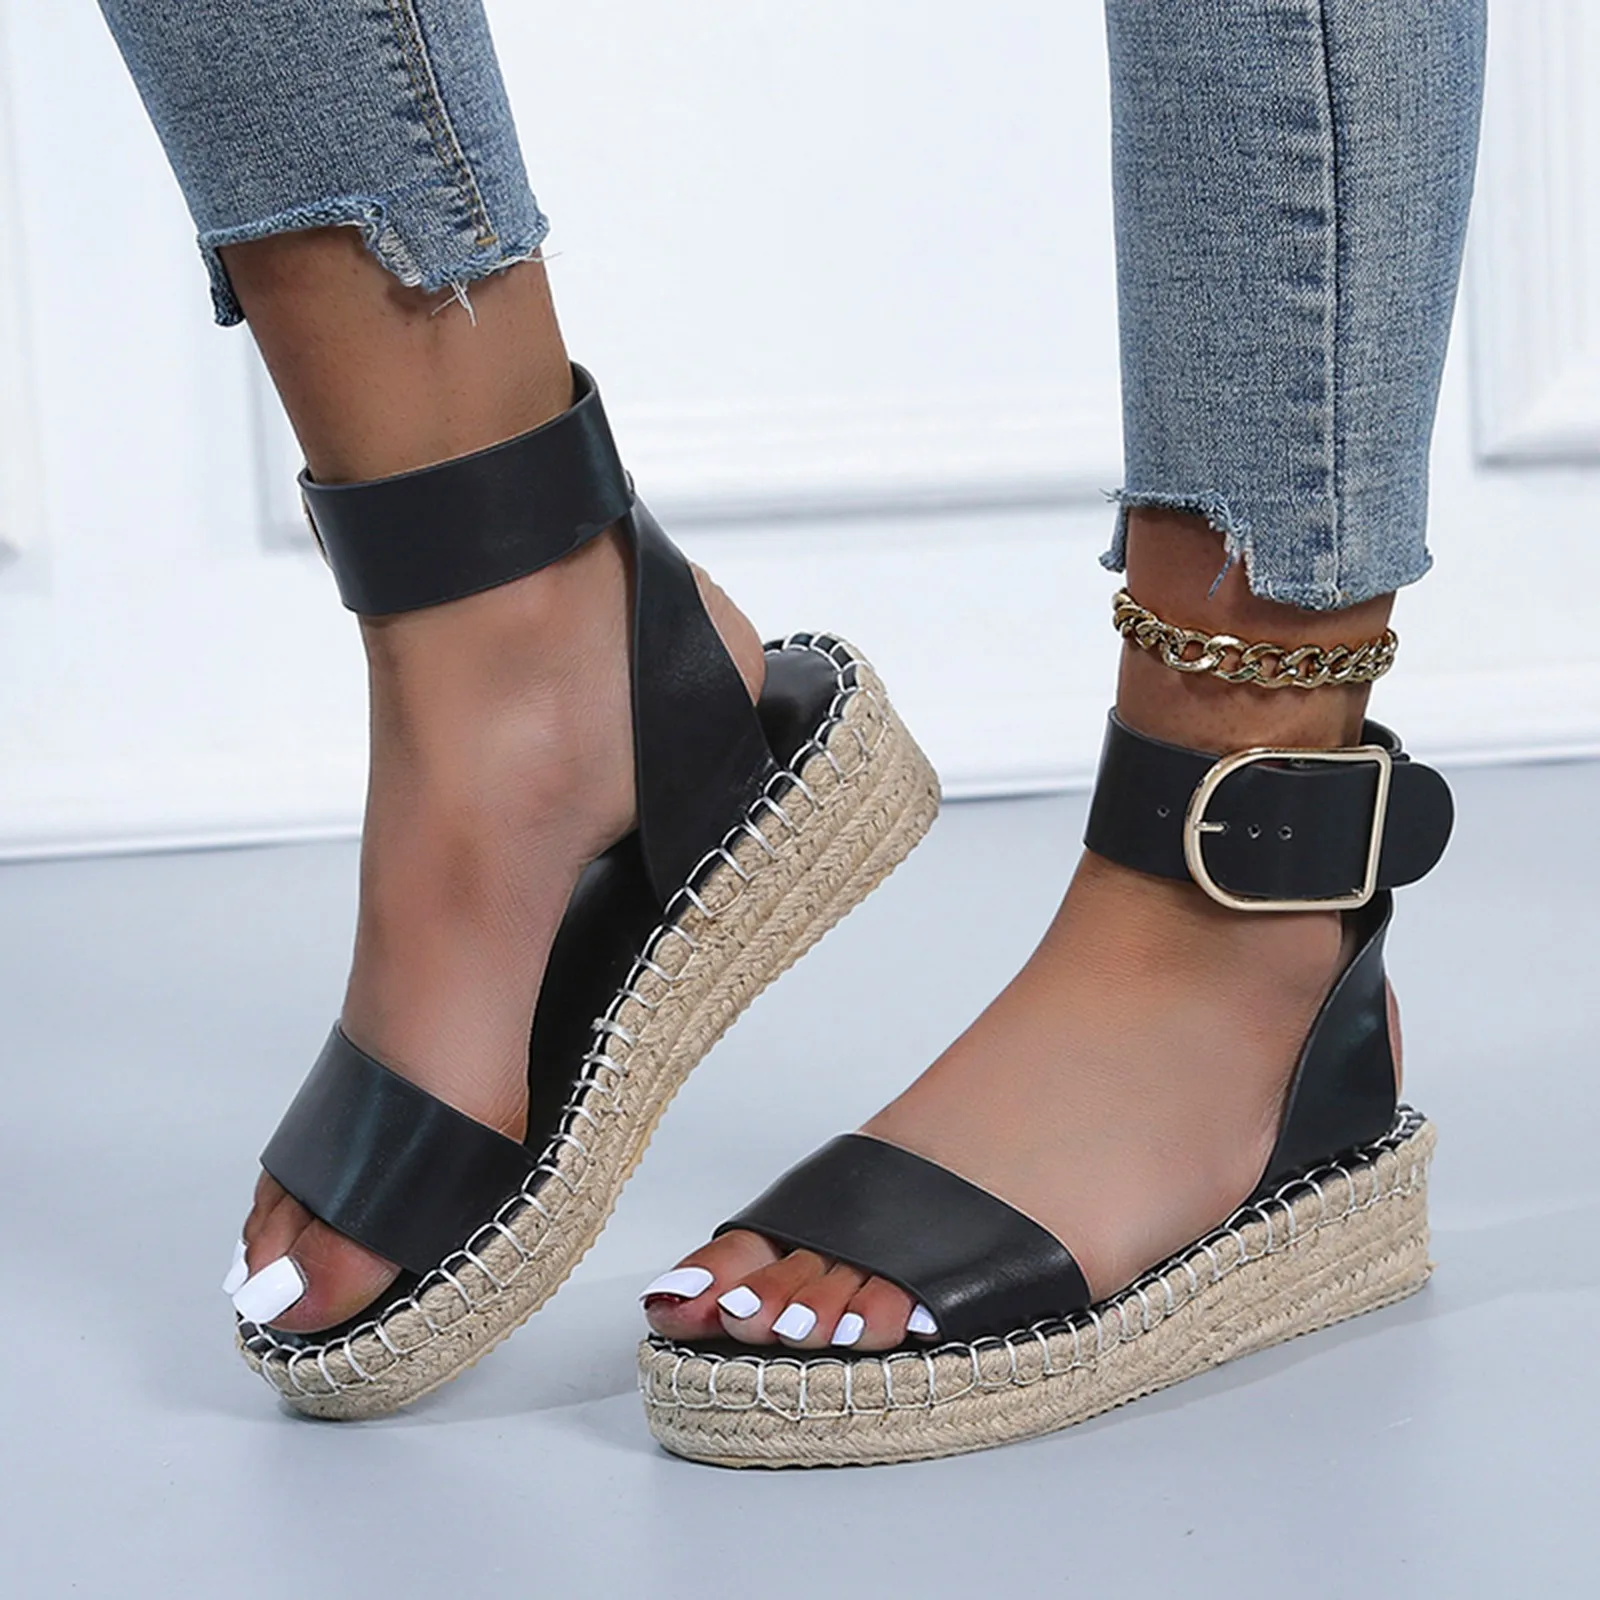 

Casual Thick-soled Shoes For Women Open Toe Hemp Thick Sole Wedges Sandals Fashion Metal Buckle Sandals zapatos para mujeres